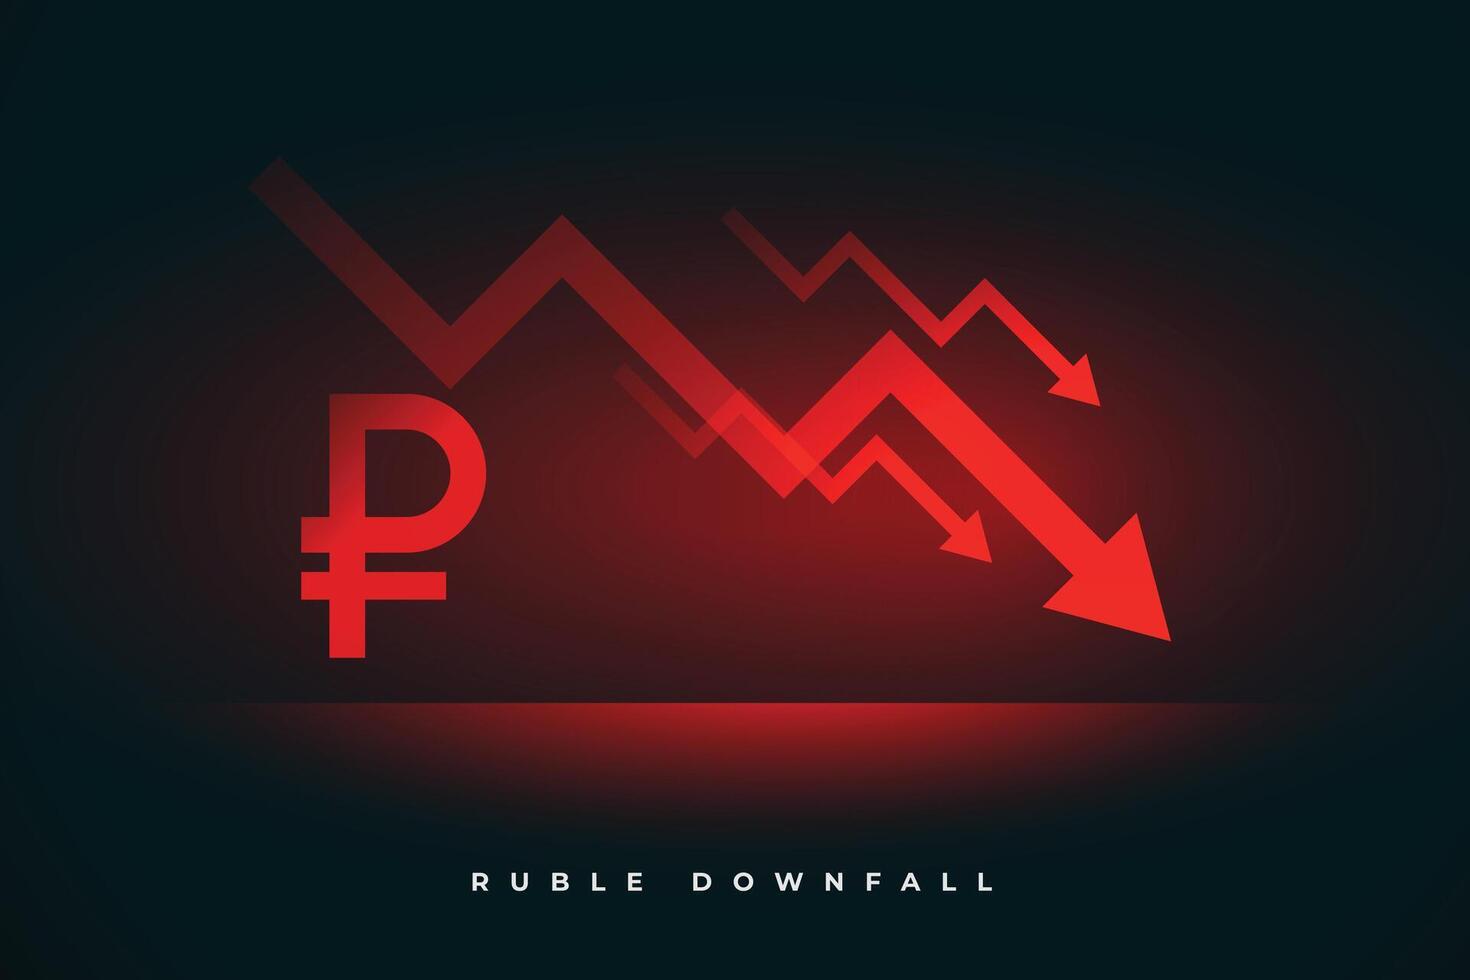 ruble collapse of russian currency with downfall arrow in red vector